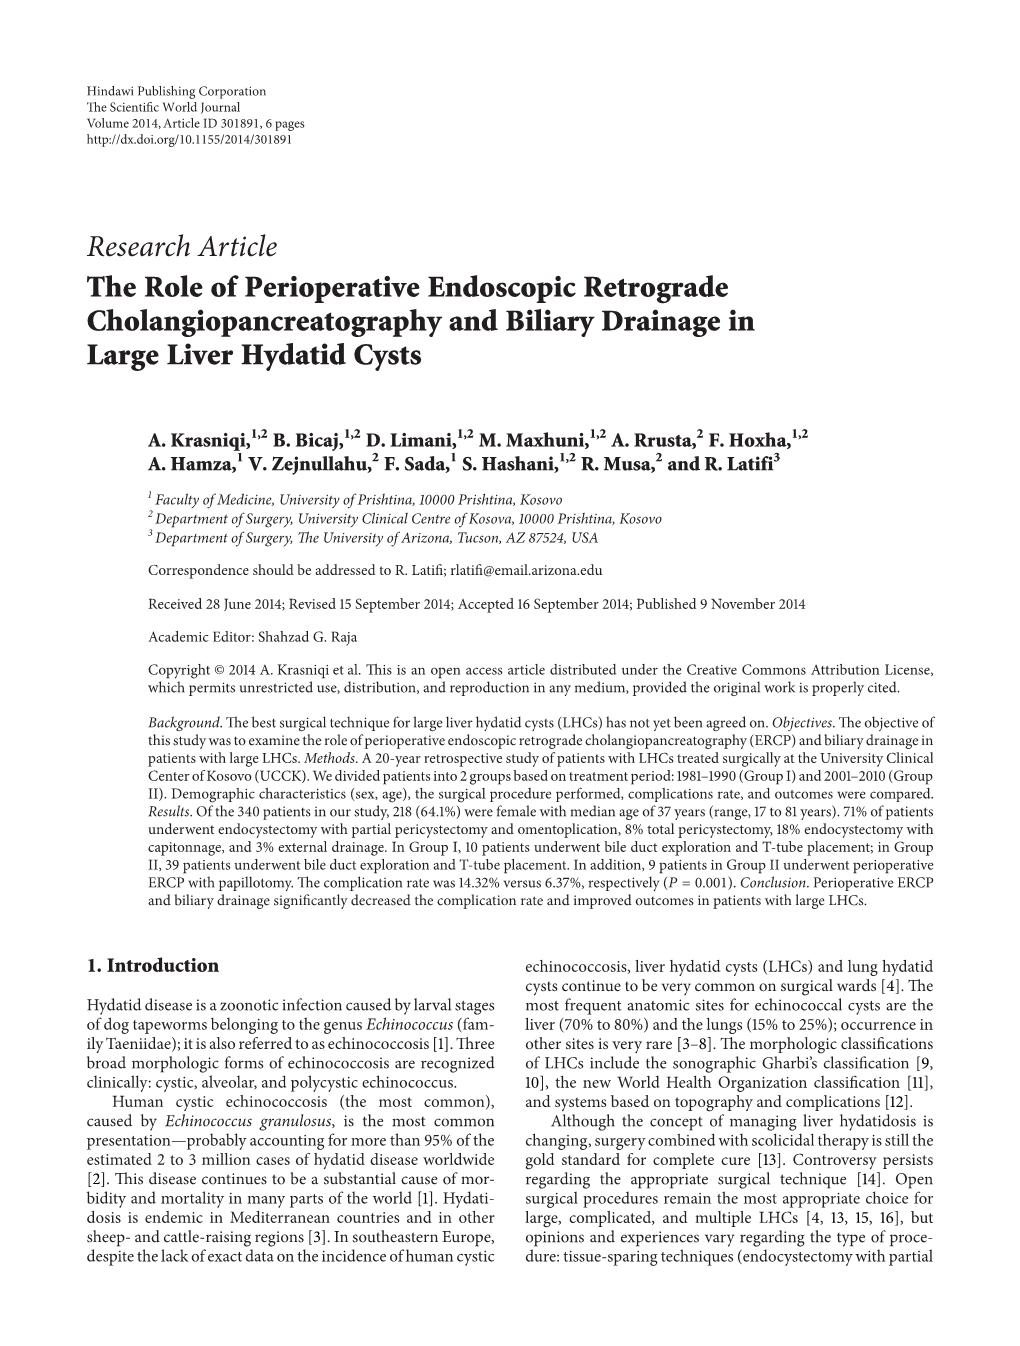 The Role of Perioperative Endoscopic Retrograde Cholangiopancreatography and Biliary Drainage in Large Liver Hydatid Cysts